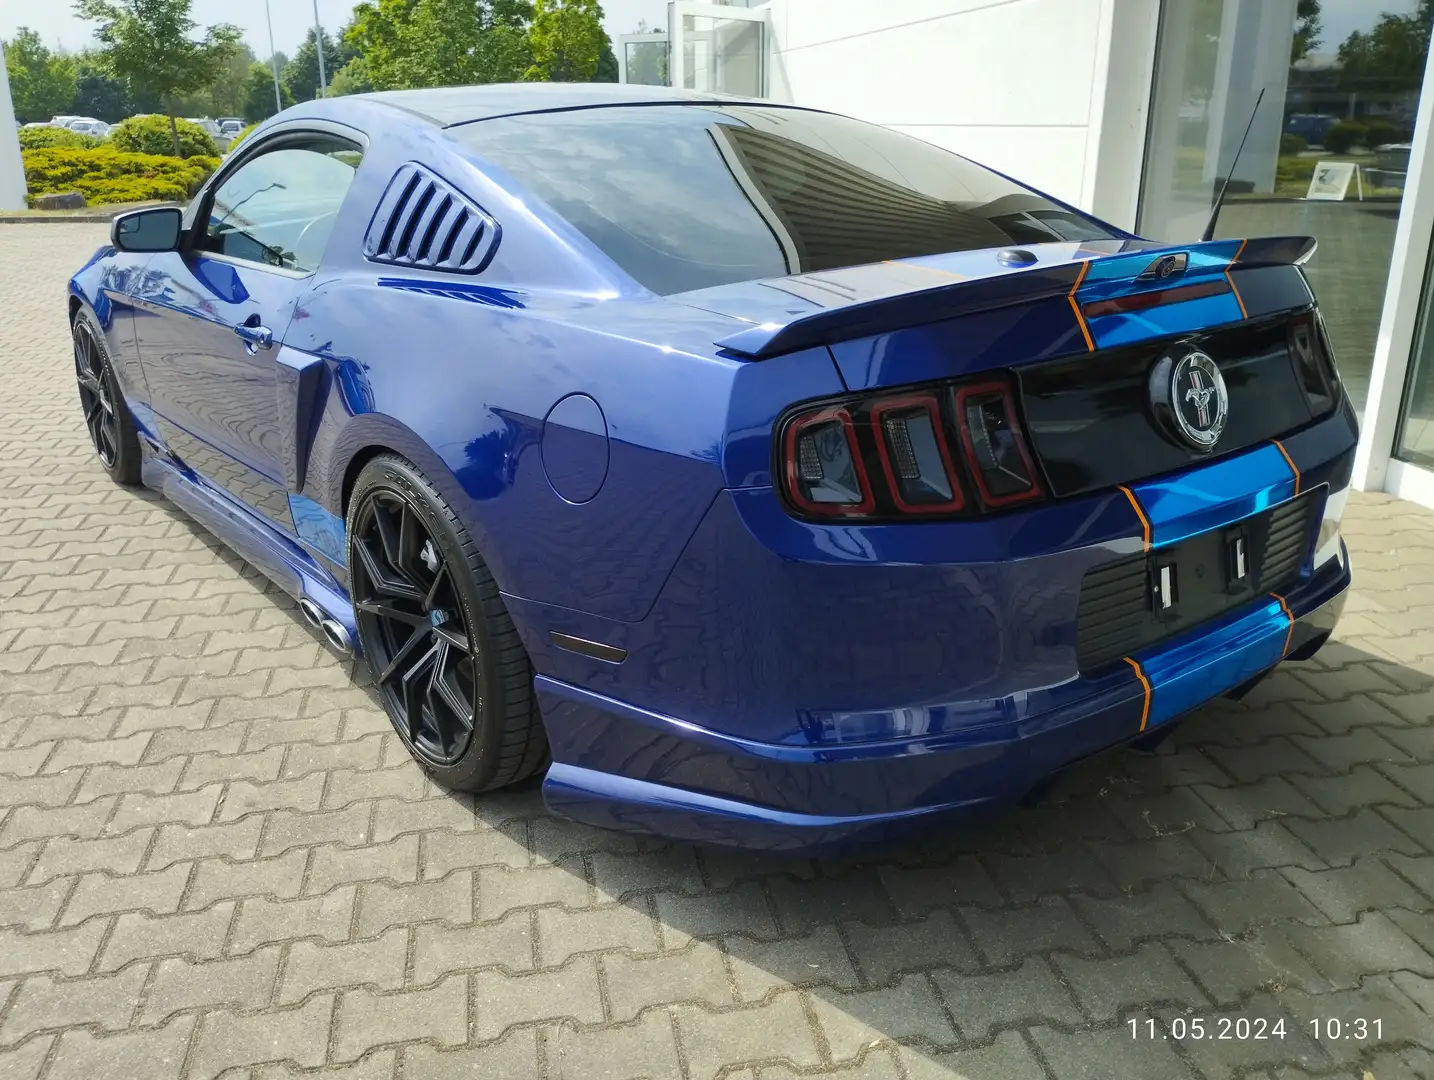 Ford Mustang Premium Package - Cervini Bodykit - Launch Control Bleu - 2